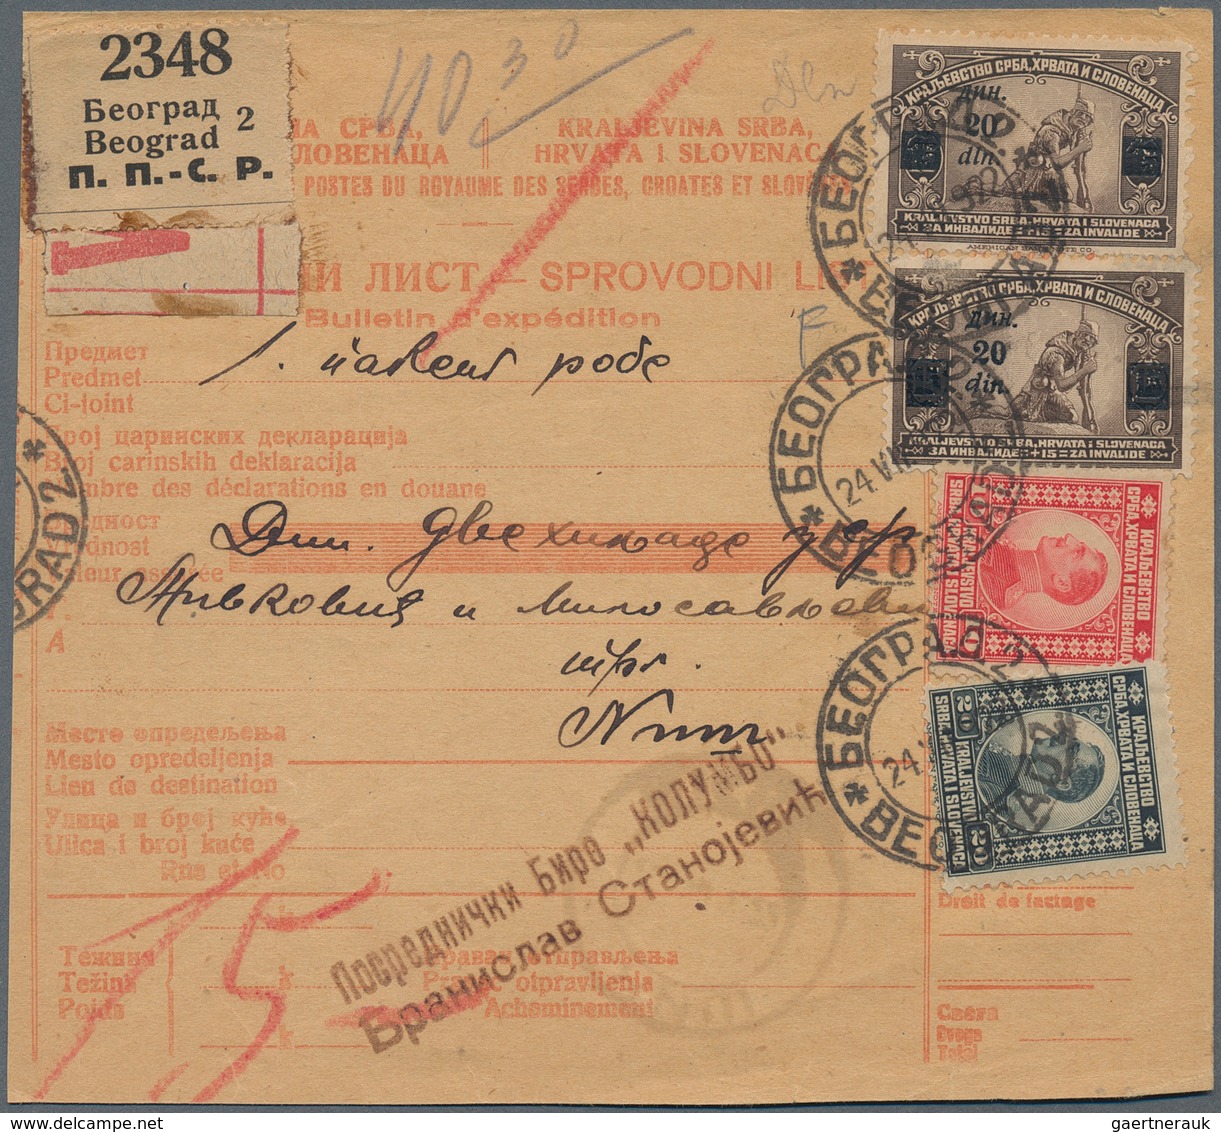 Jugoslawien: 1922, Red/chamois "SPROVODNI LIST" Accompanying A Large Parcel Of 15kg, Value Declared - Unused Stamps